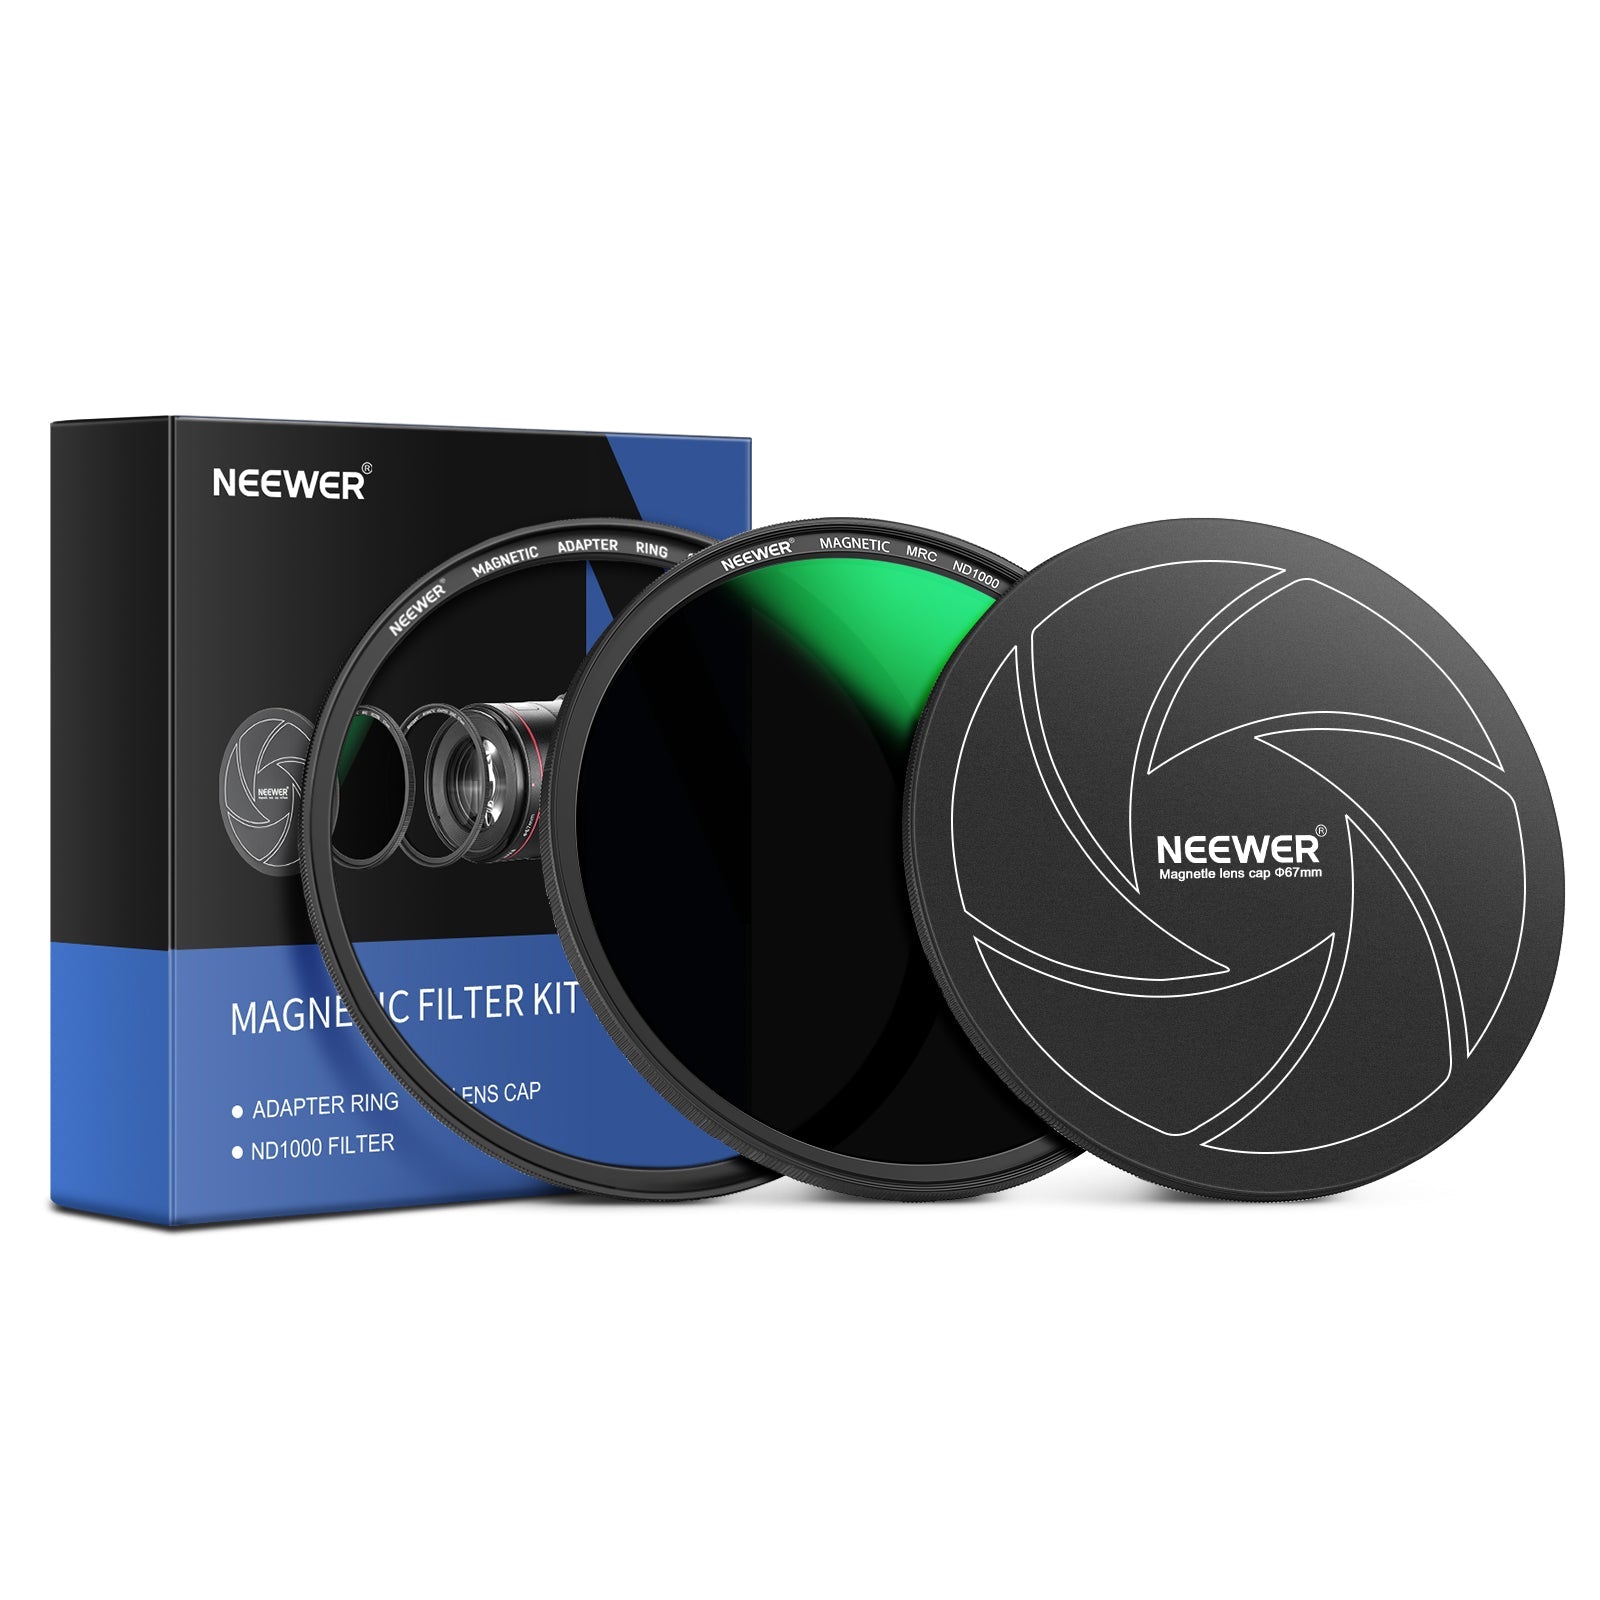 NEEWER 3-in-1 Magnetic ND Lens Filter Kit with Filter Cap and Adapter Ring